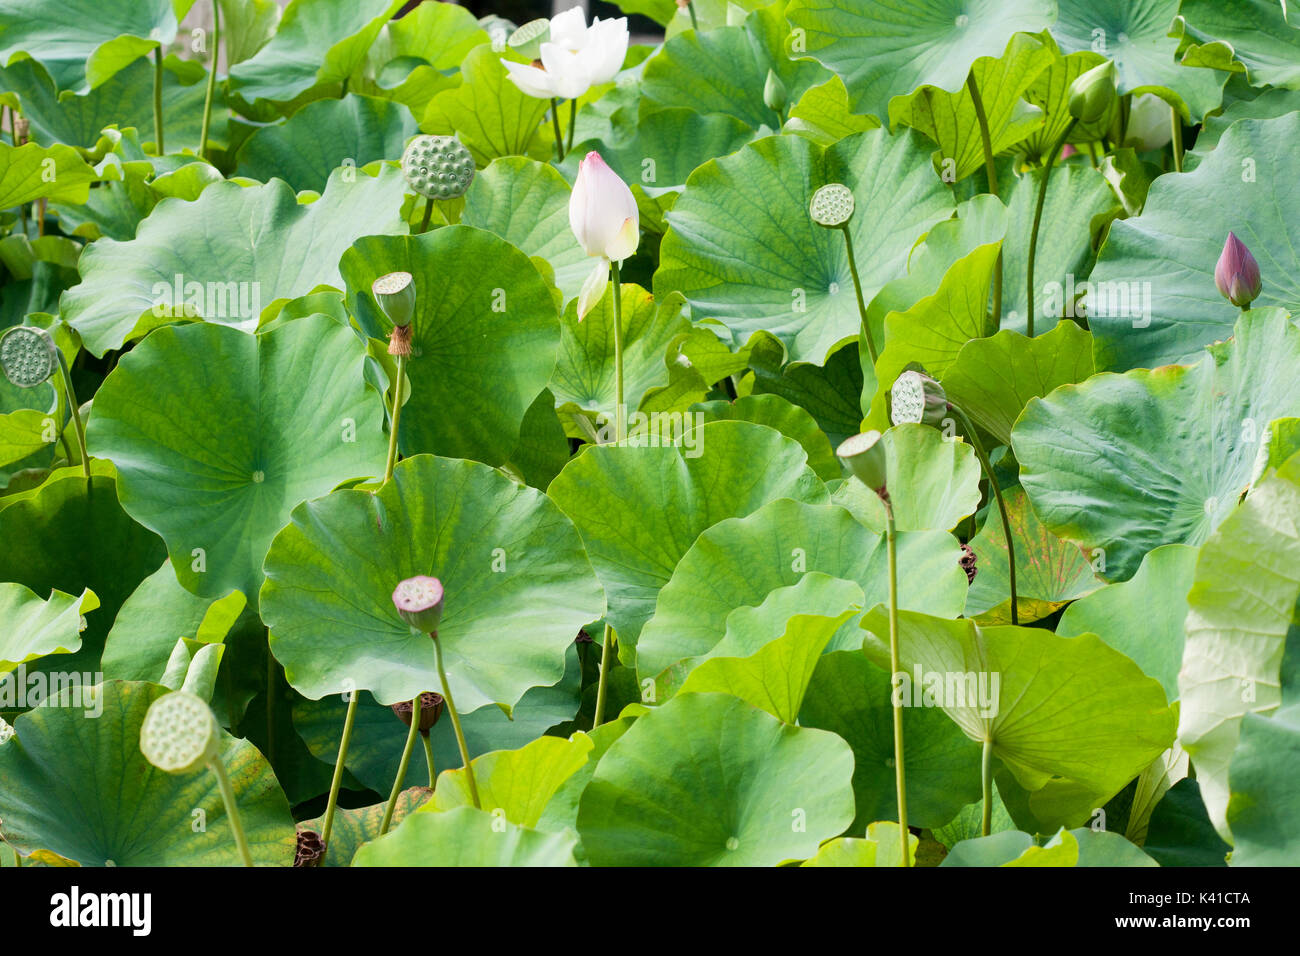 Lotus plants growing in pond Stock Photo